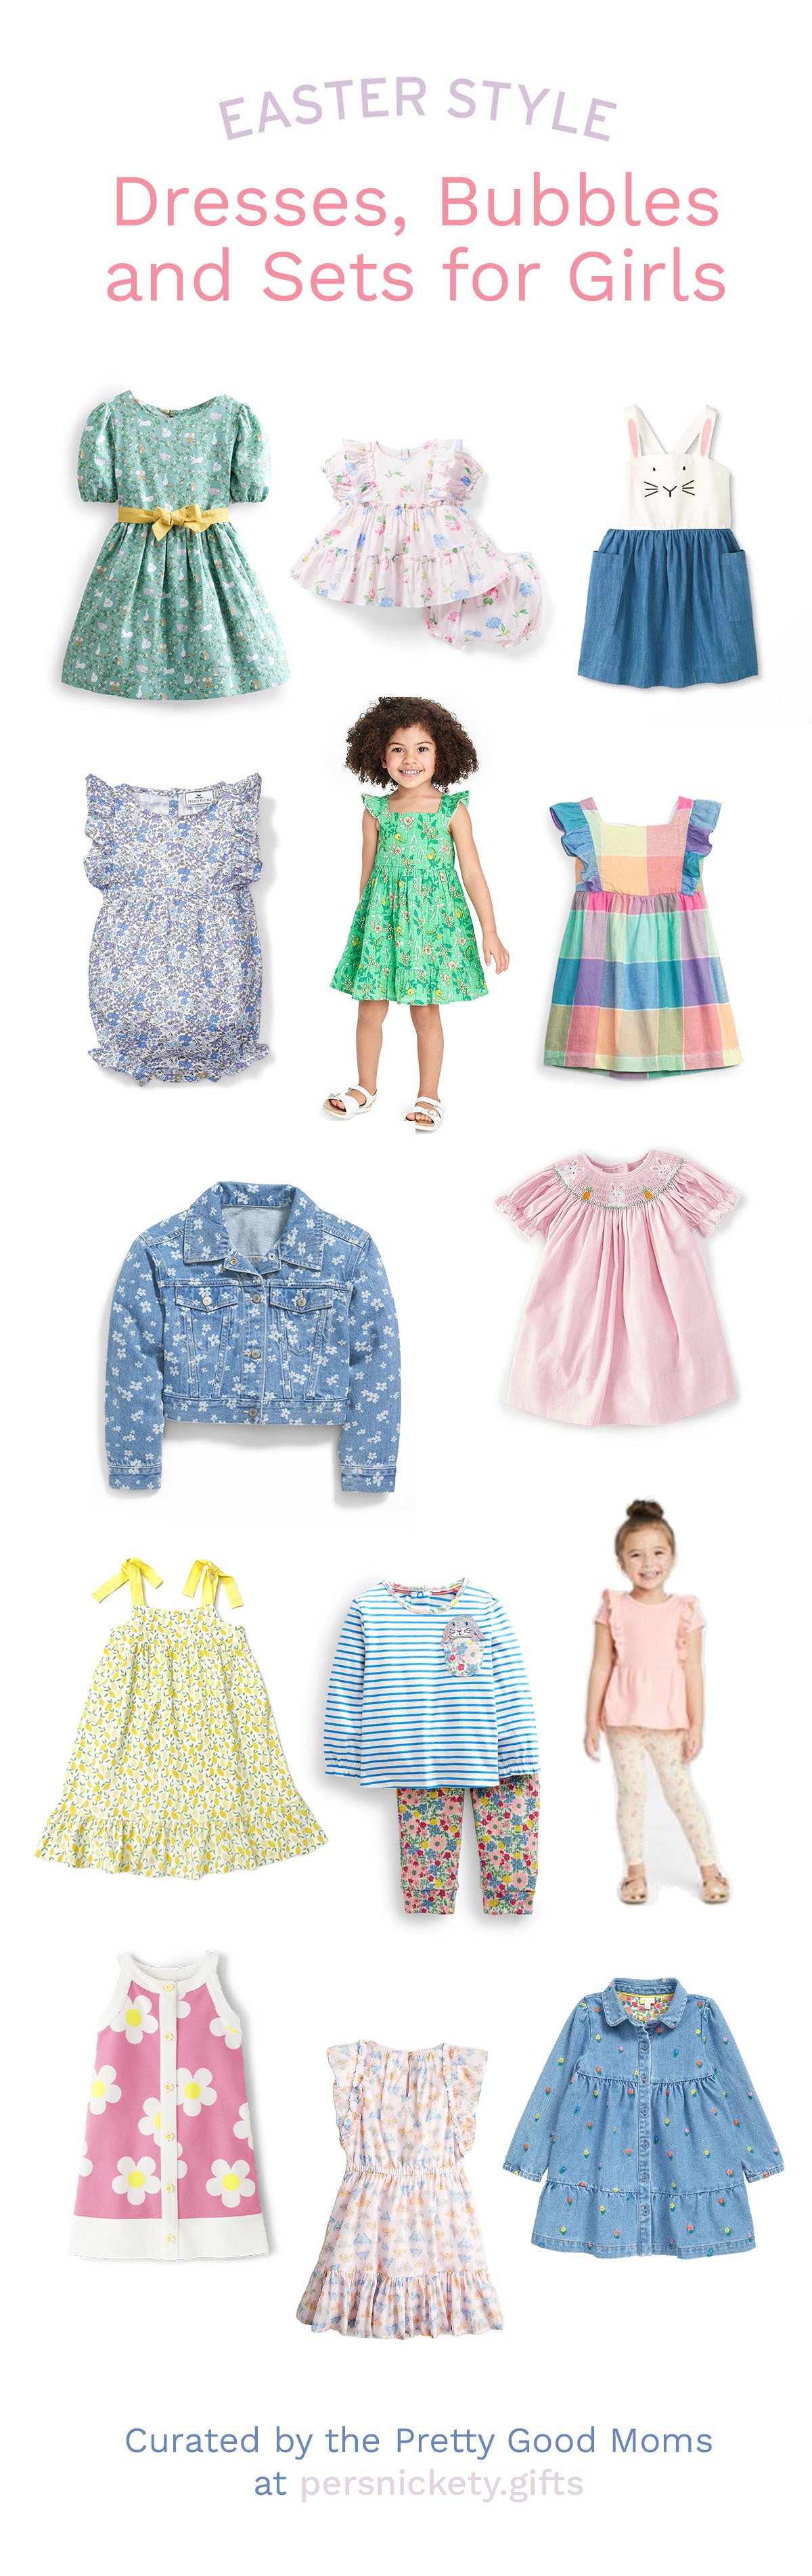 Best Easter Outfits and Pajamas for Babies, Toddlers, and Kids